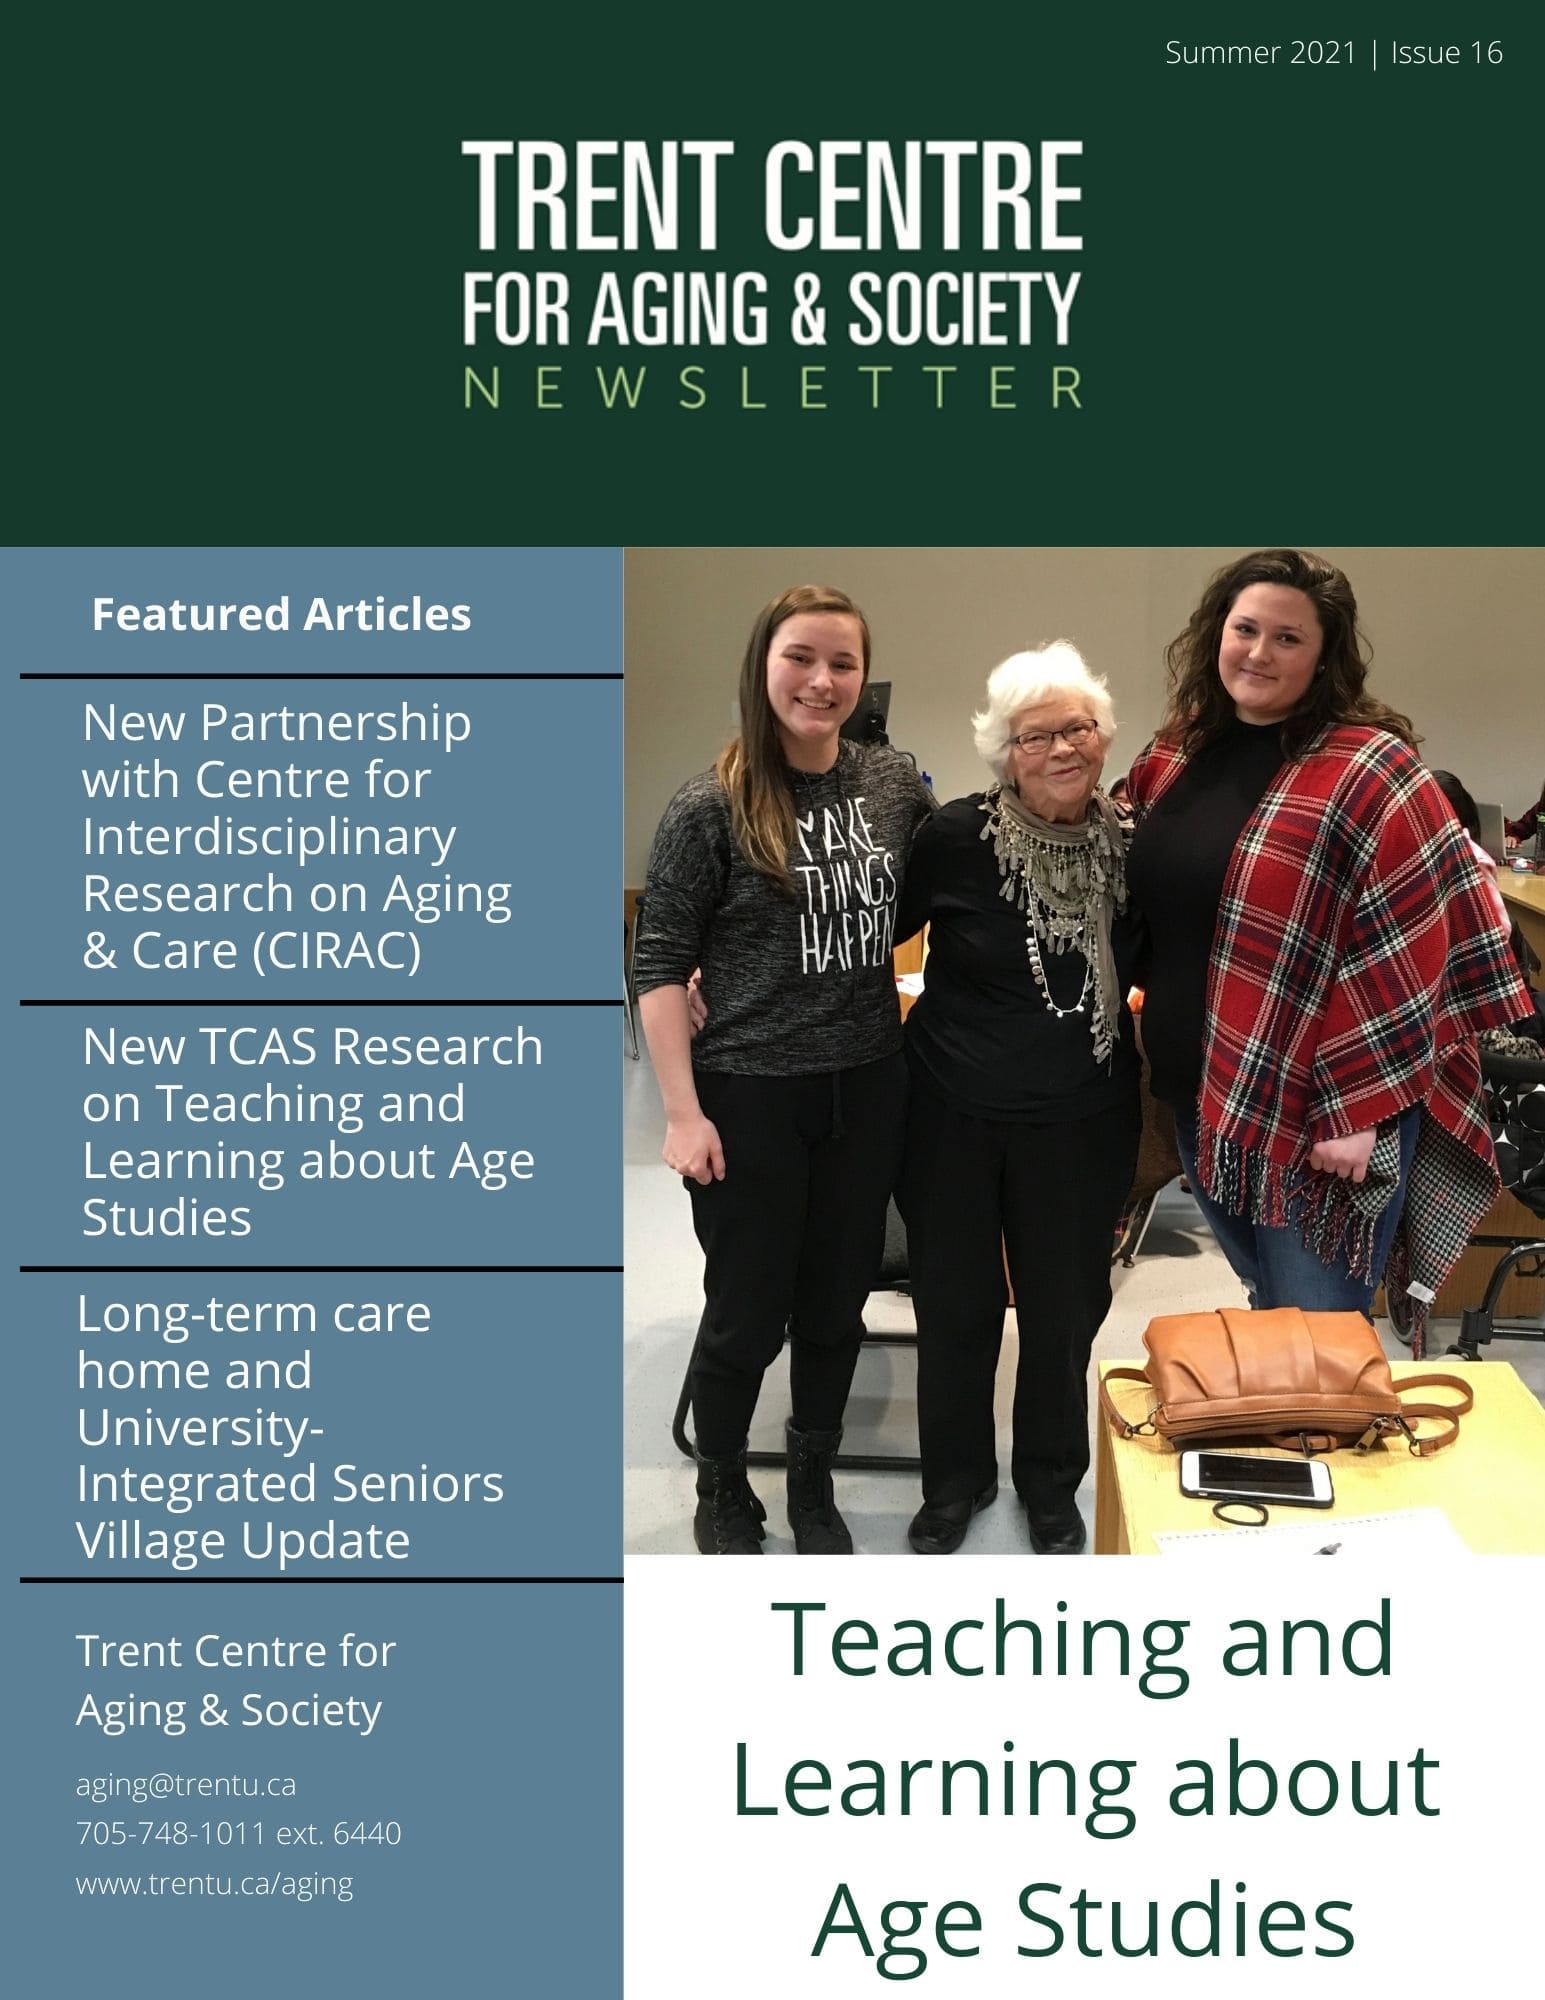 Trent Centre for Aging & Society - Teaching and Learning about Age Studies